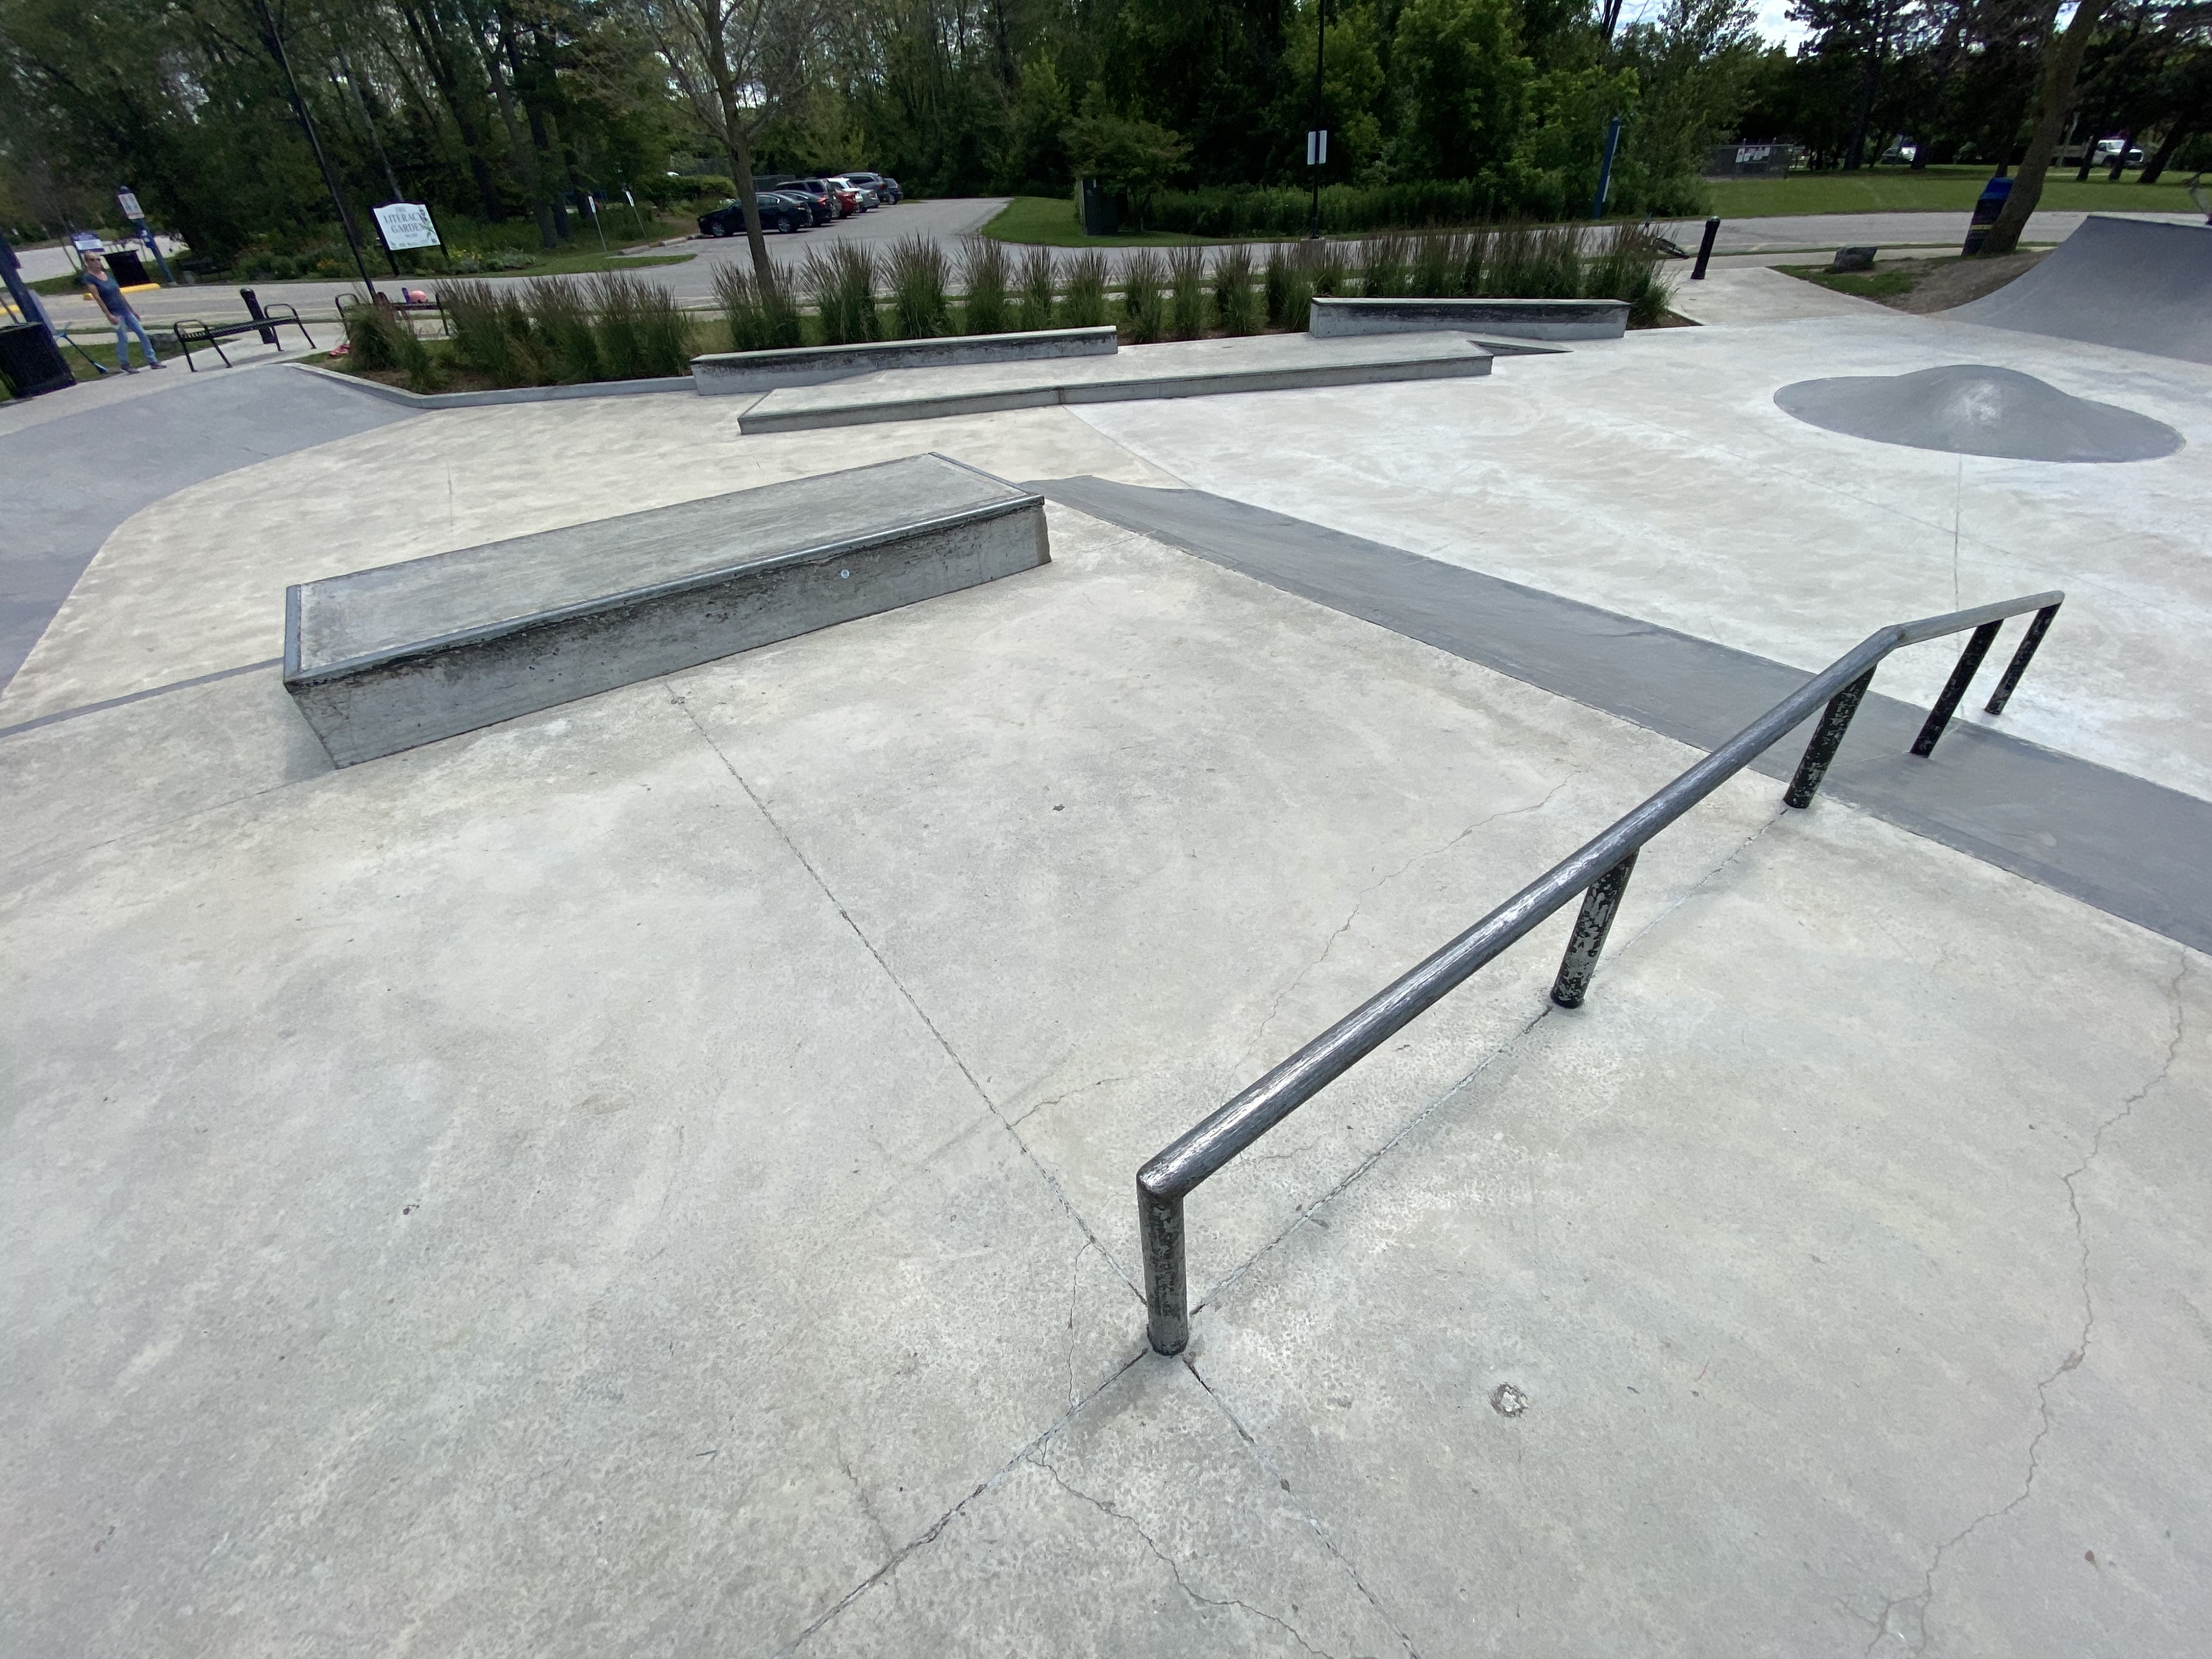 holland landing skatepark from the corner with the across and down rail